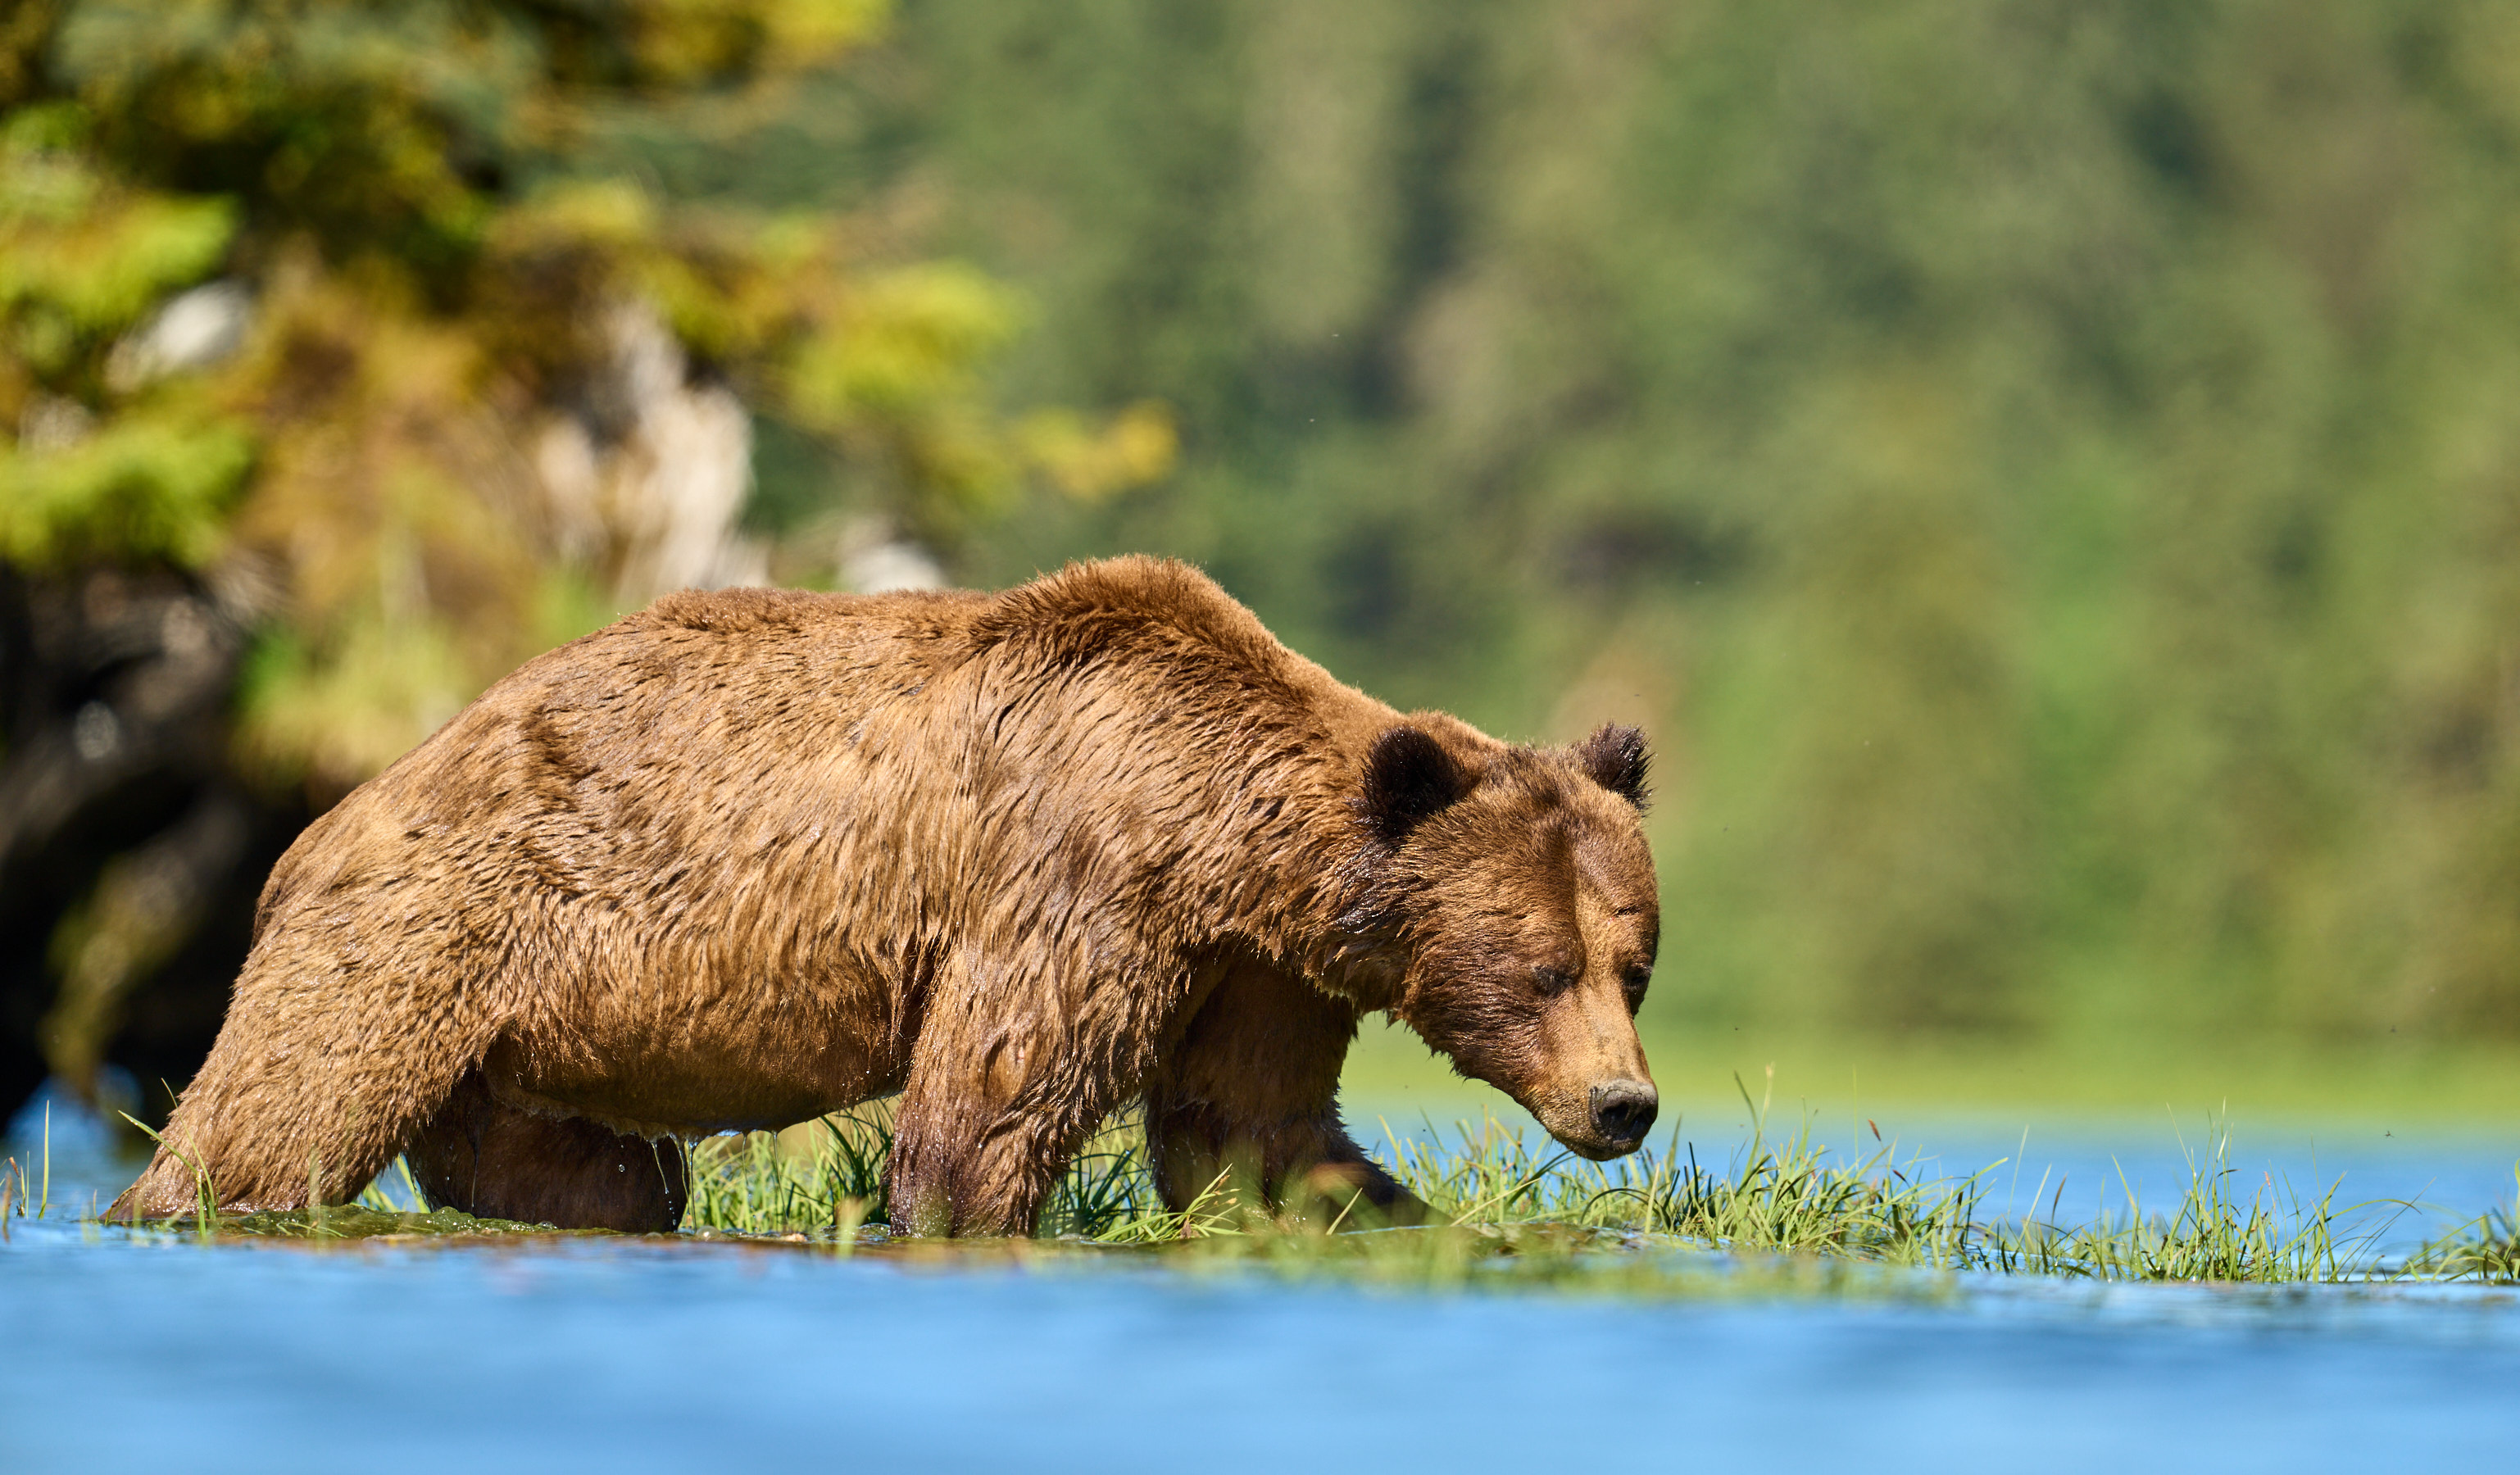 PTAware_Vol_28_Grizzly_bears_Peter_Hudson